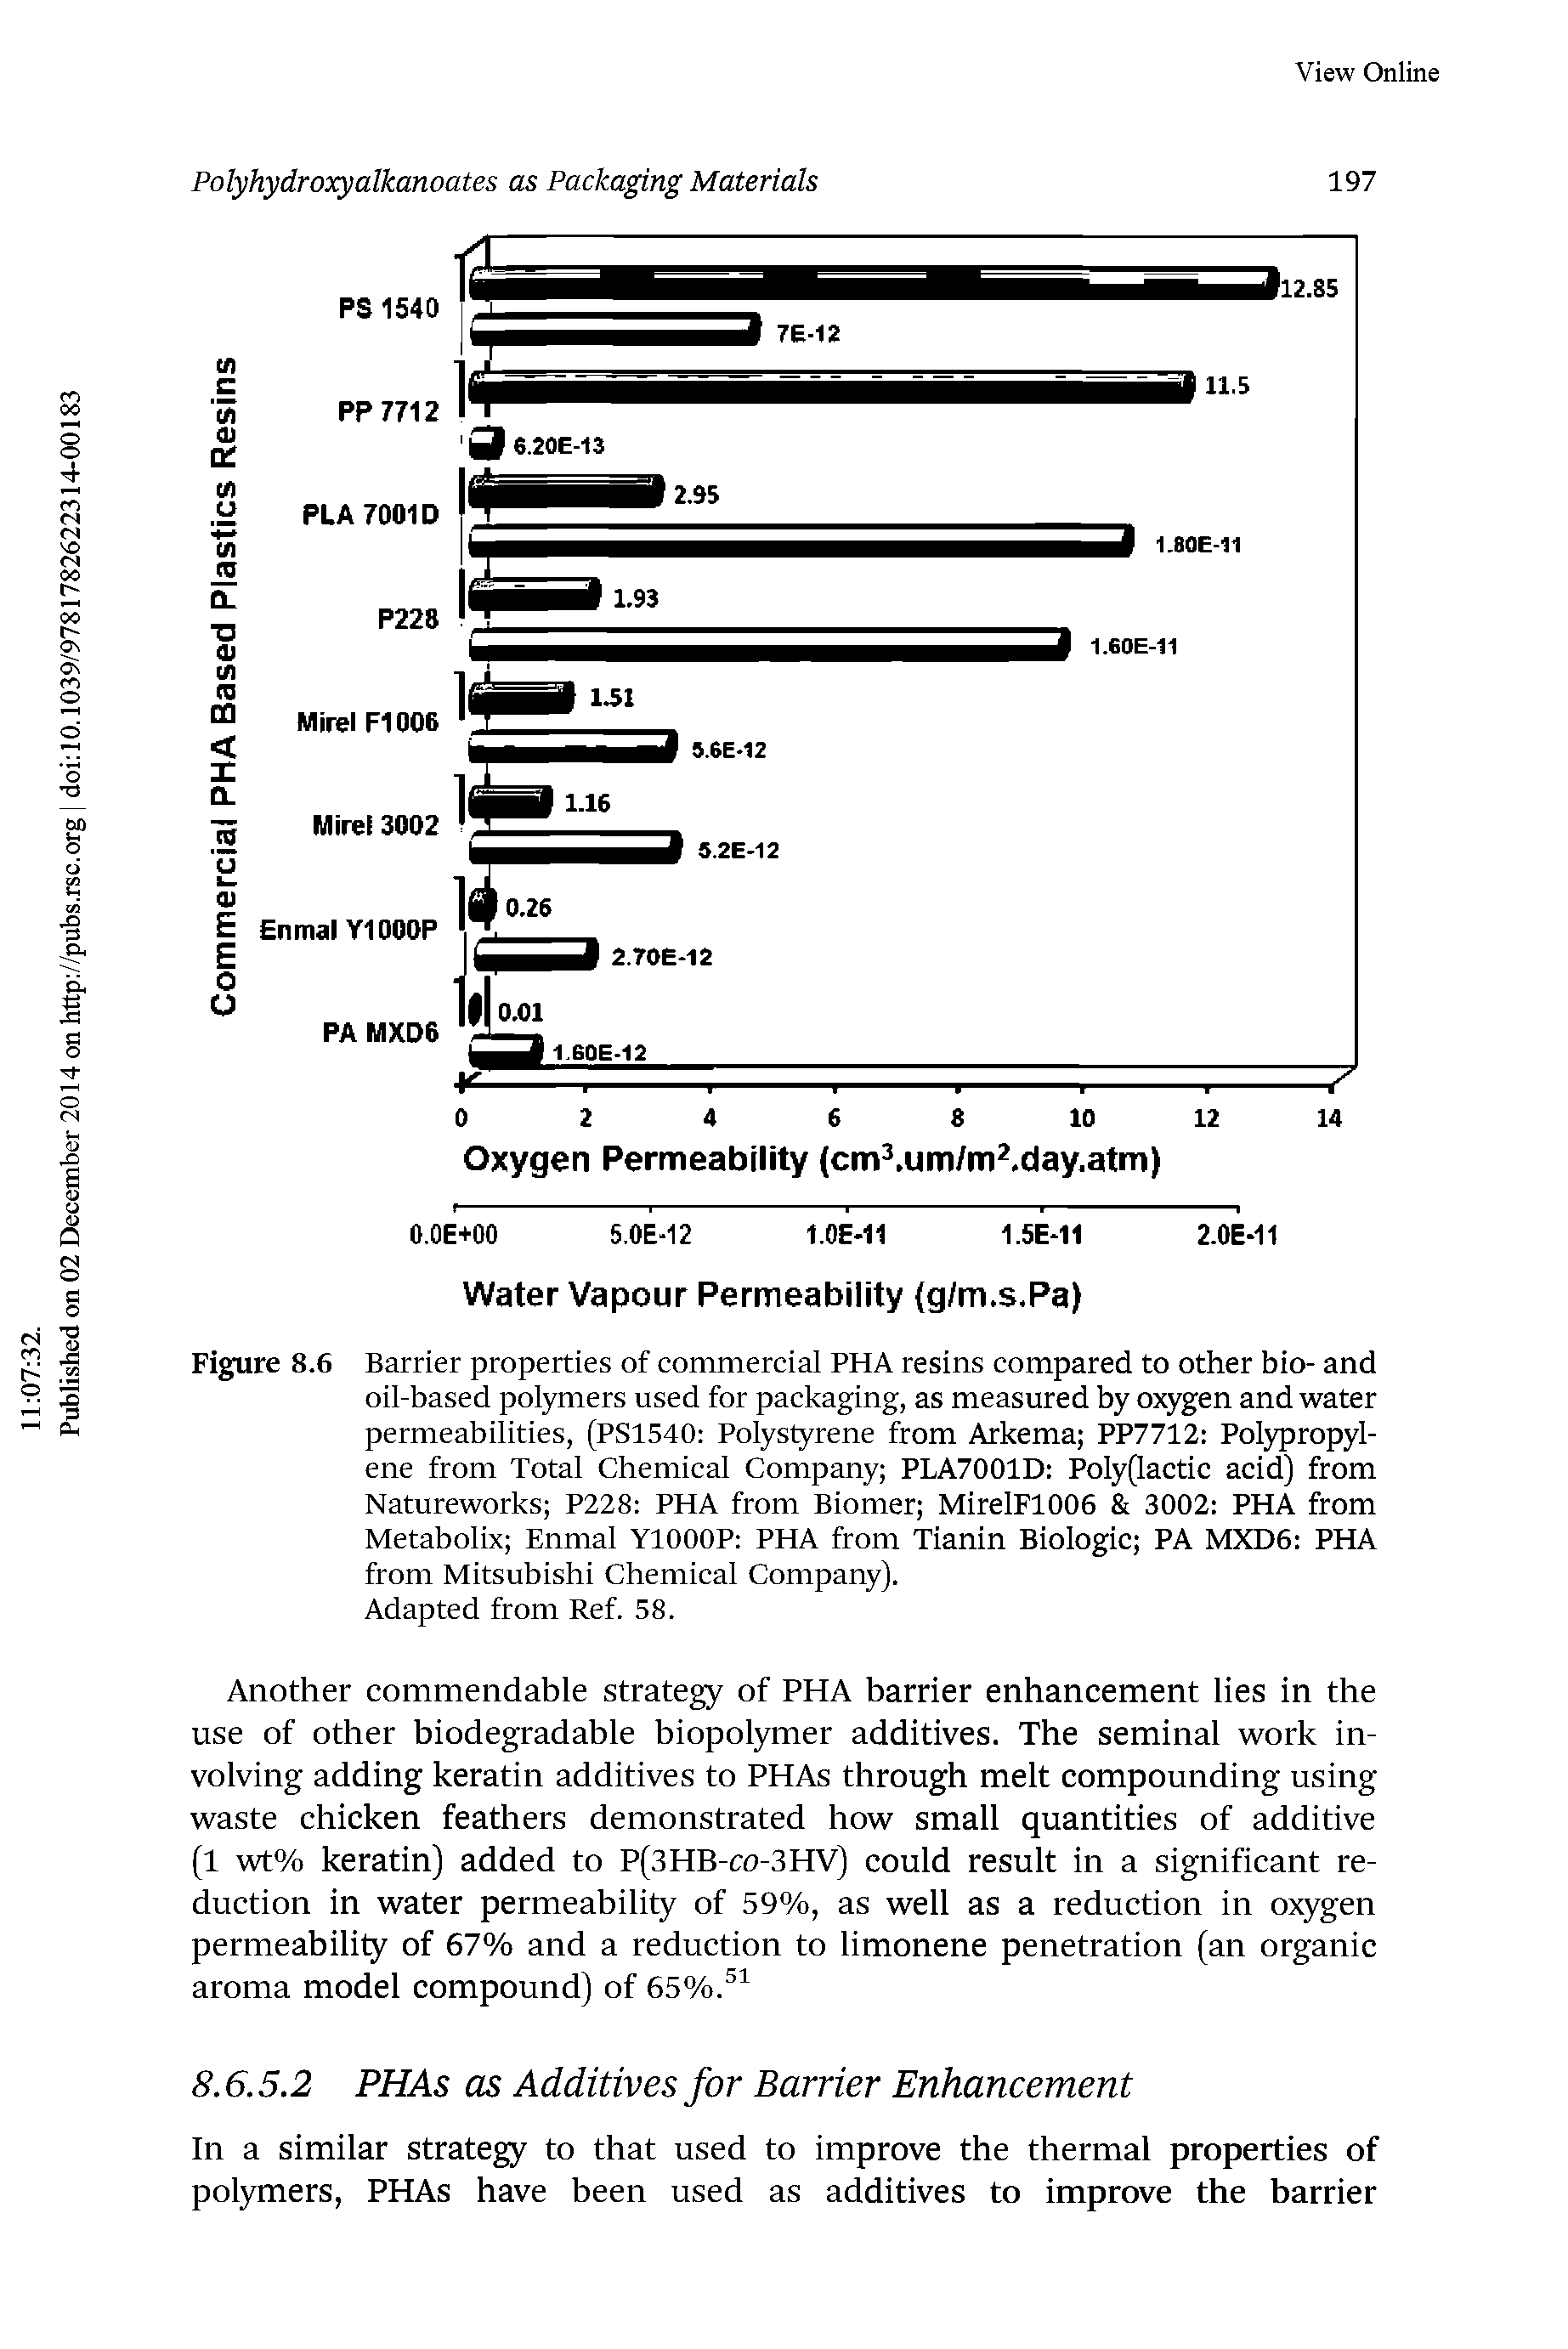 Figure 8.6 Barrier properties of commercial PHA resins compared to other bio- and oil-based polymers used for packaging, as measured by oxygen and water permeabilities, (PS1540 Polystyrene from Arkema PP7712 Polypropylene from Total Chemical Company PLA7001D Poly(lactic acid) from Natureworks P228 PHA from Biomer MirelF1006 3002 PHA from Metabolix Enmal YIOOOP PHA from Tianin Biologic PA MXD6 PHA from Mitsubishi Chemical Company).